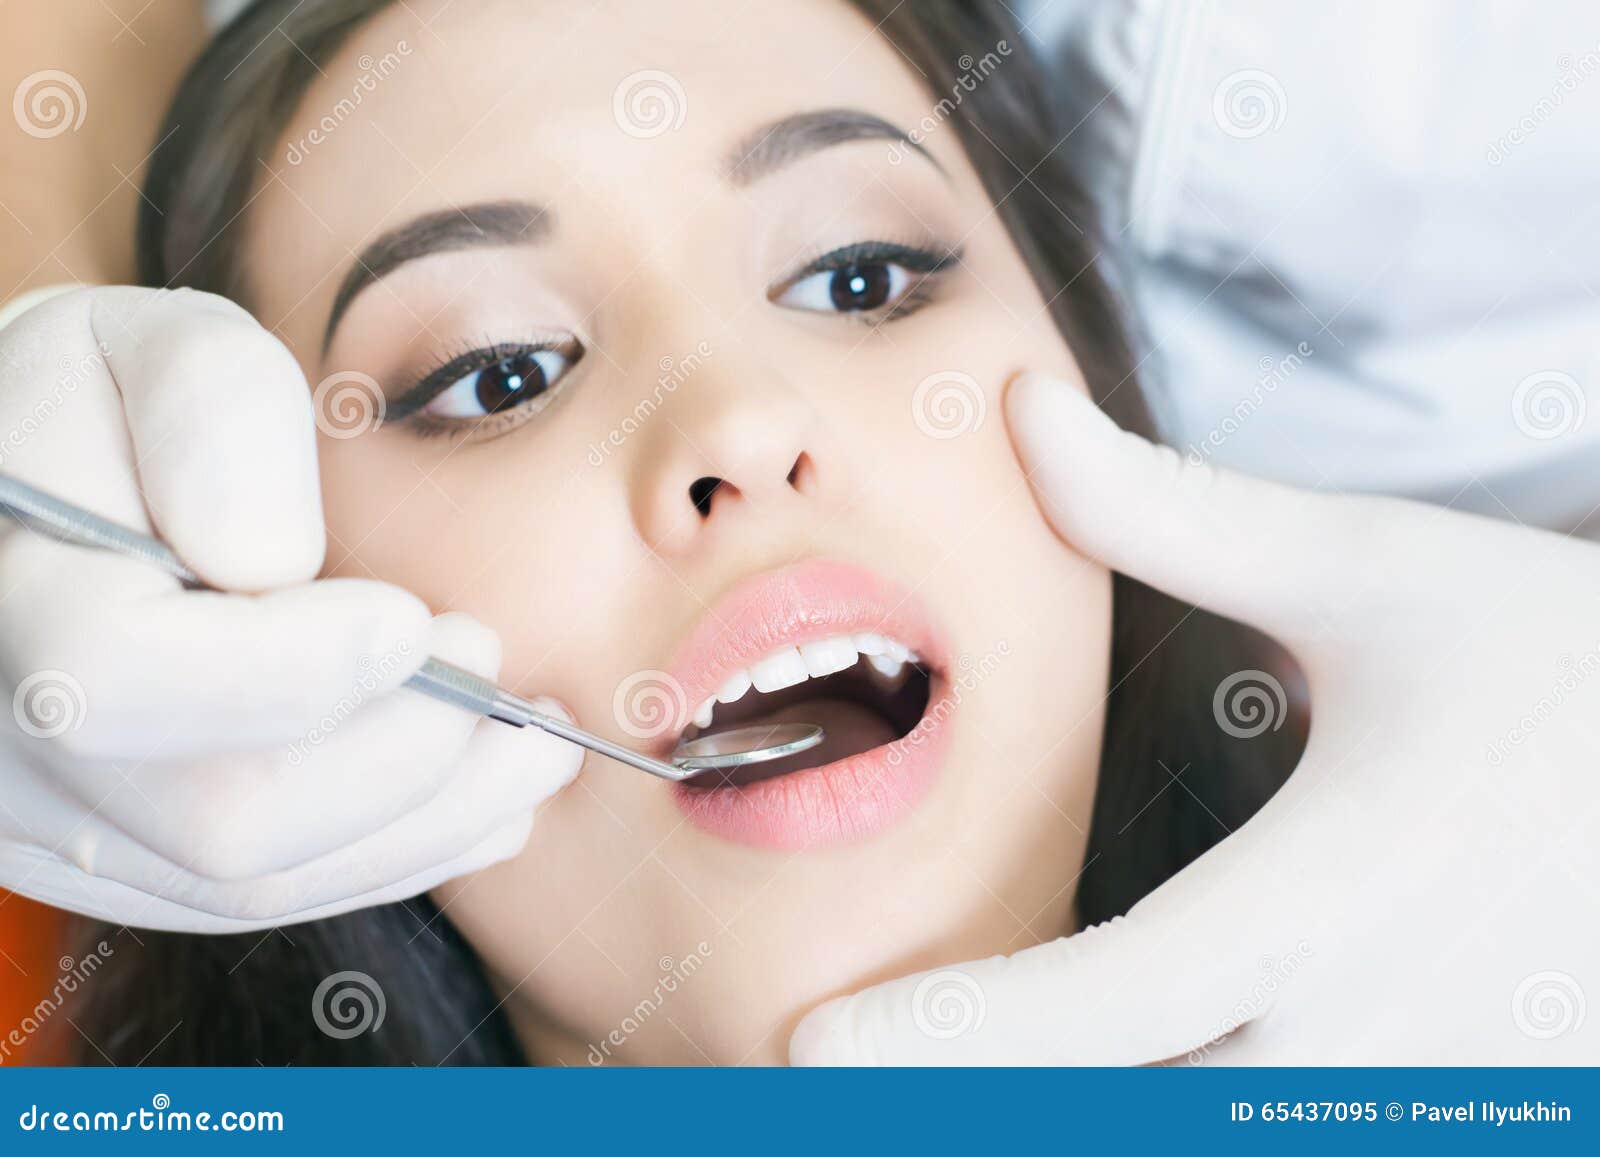 beautiful asian woman visit to dental clinic, doctor